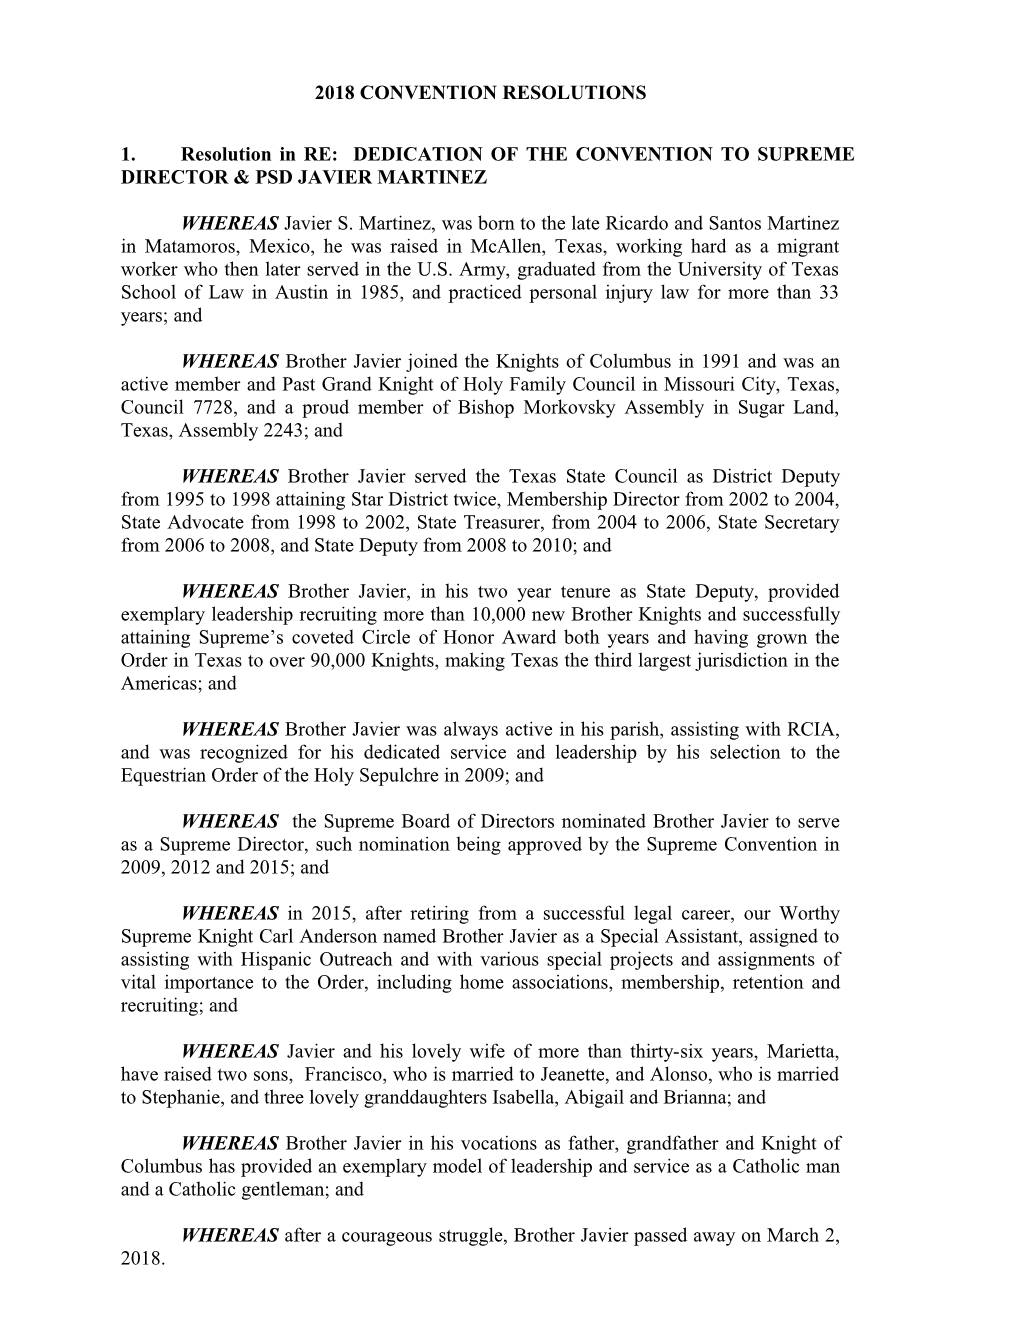 1.Resolution in RE: DEDICATION of the CONVENTION to SUPREME DIRECTOR & PSD JAVIER MARTINEZ